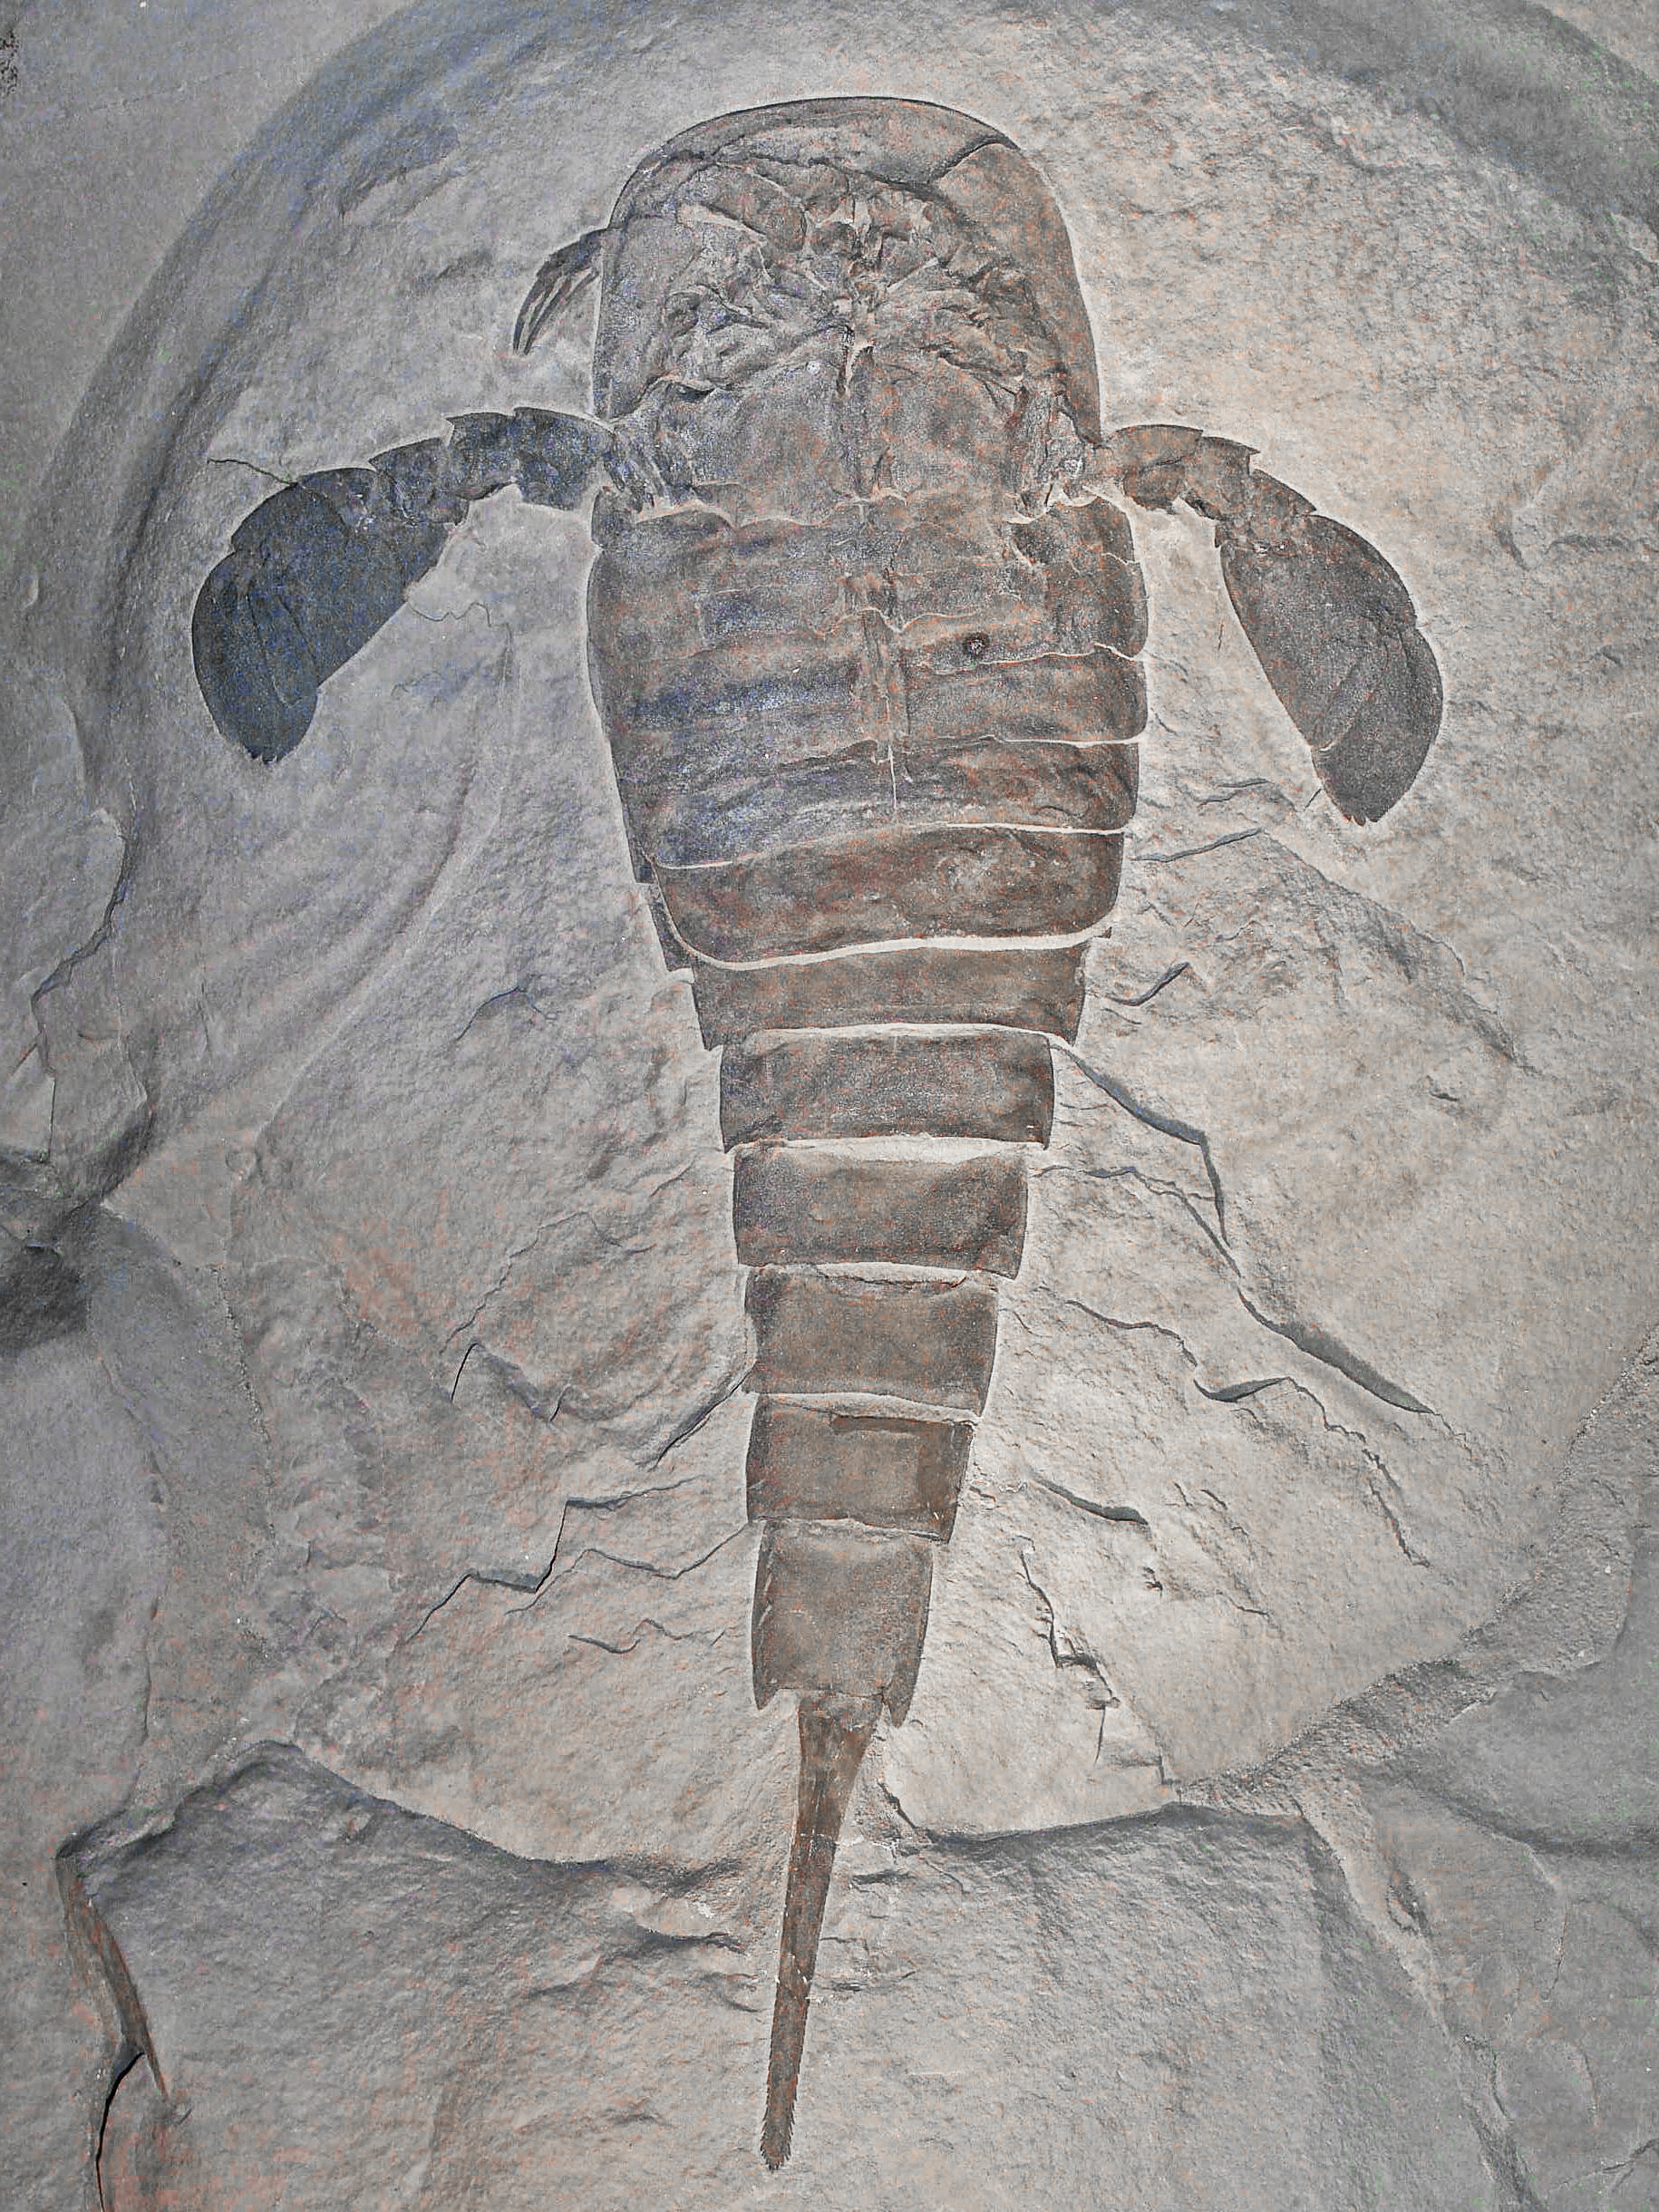 400 million years old A. Eurypterus remipes fossil. (H. Zell/Wikipedia/CC BY-SA)